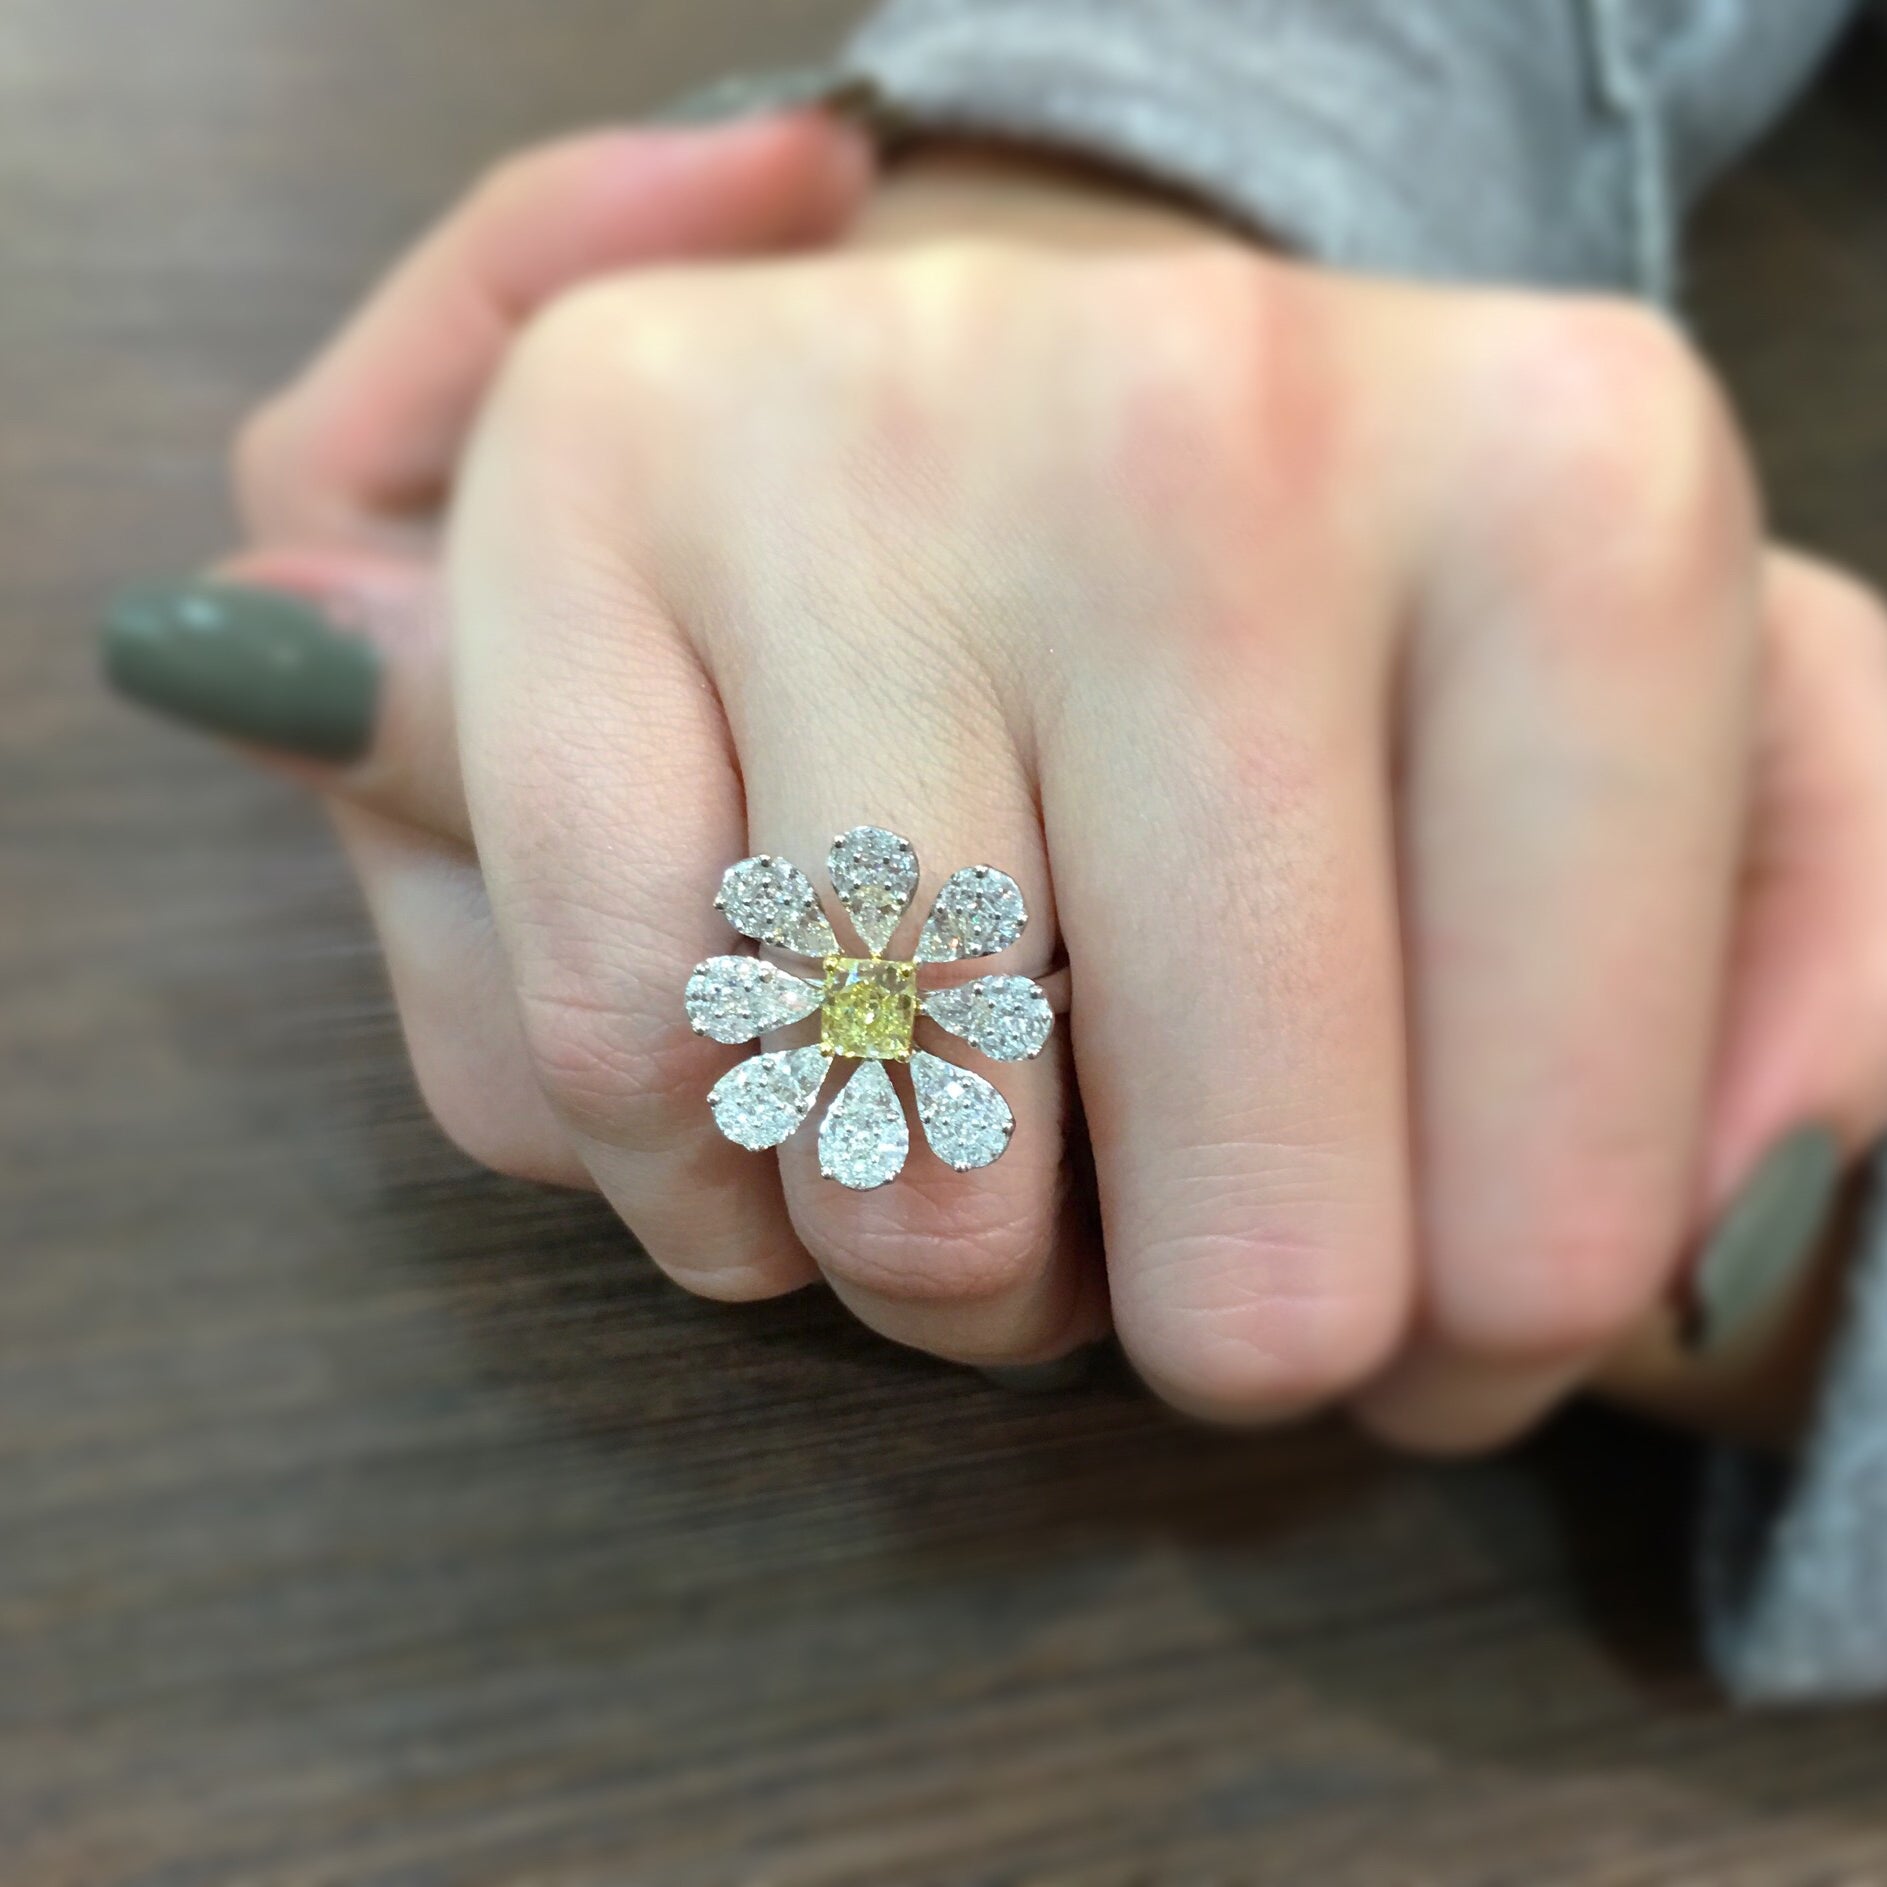 Female Model Wearing Blossoming Diamond Flower Ring  Center radiant cut diamond weighs .76cts. GIA report # 61737737614.  Size width 20.3 millimeters.